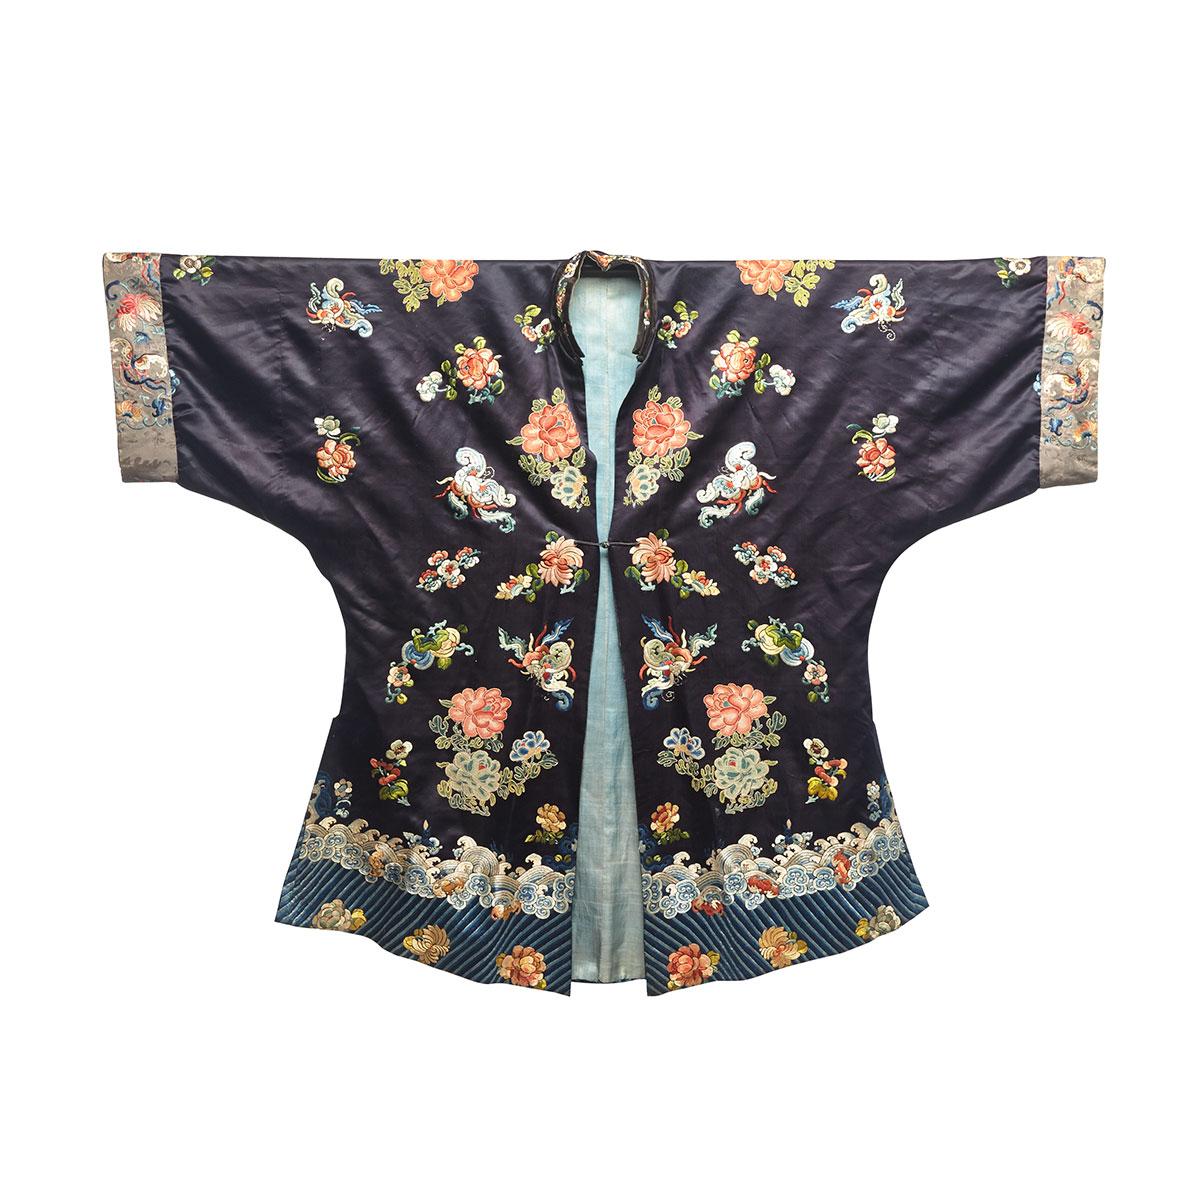 Silk Embroidered Lady’s Jacket, Early 20th Century